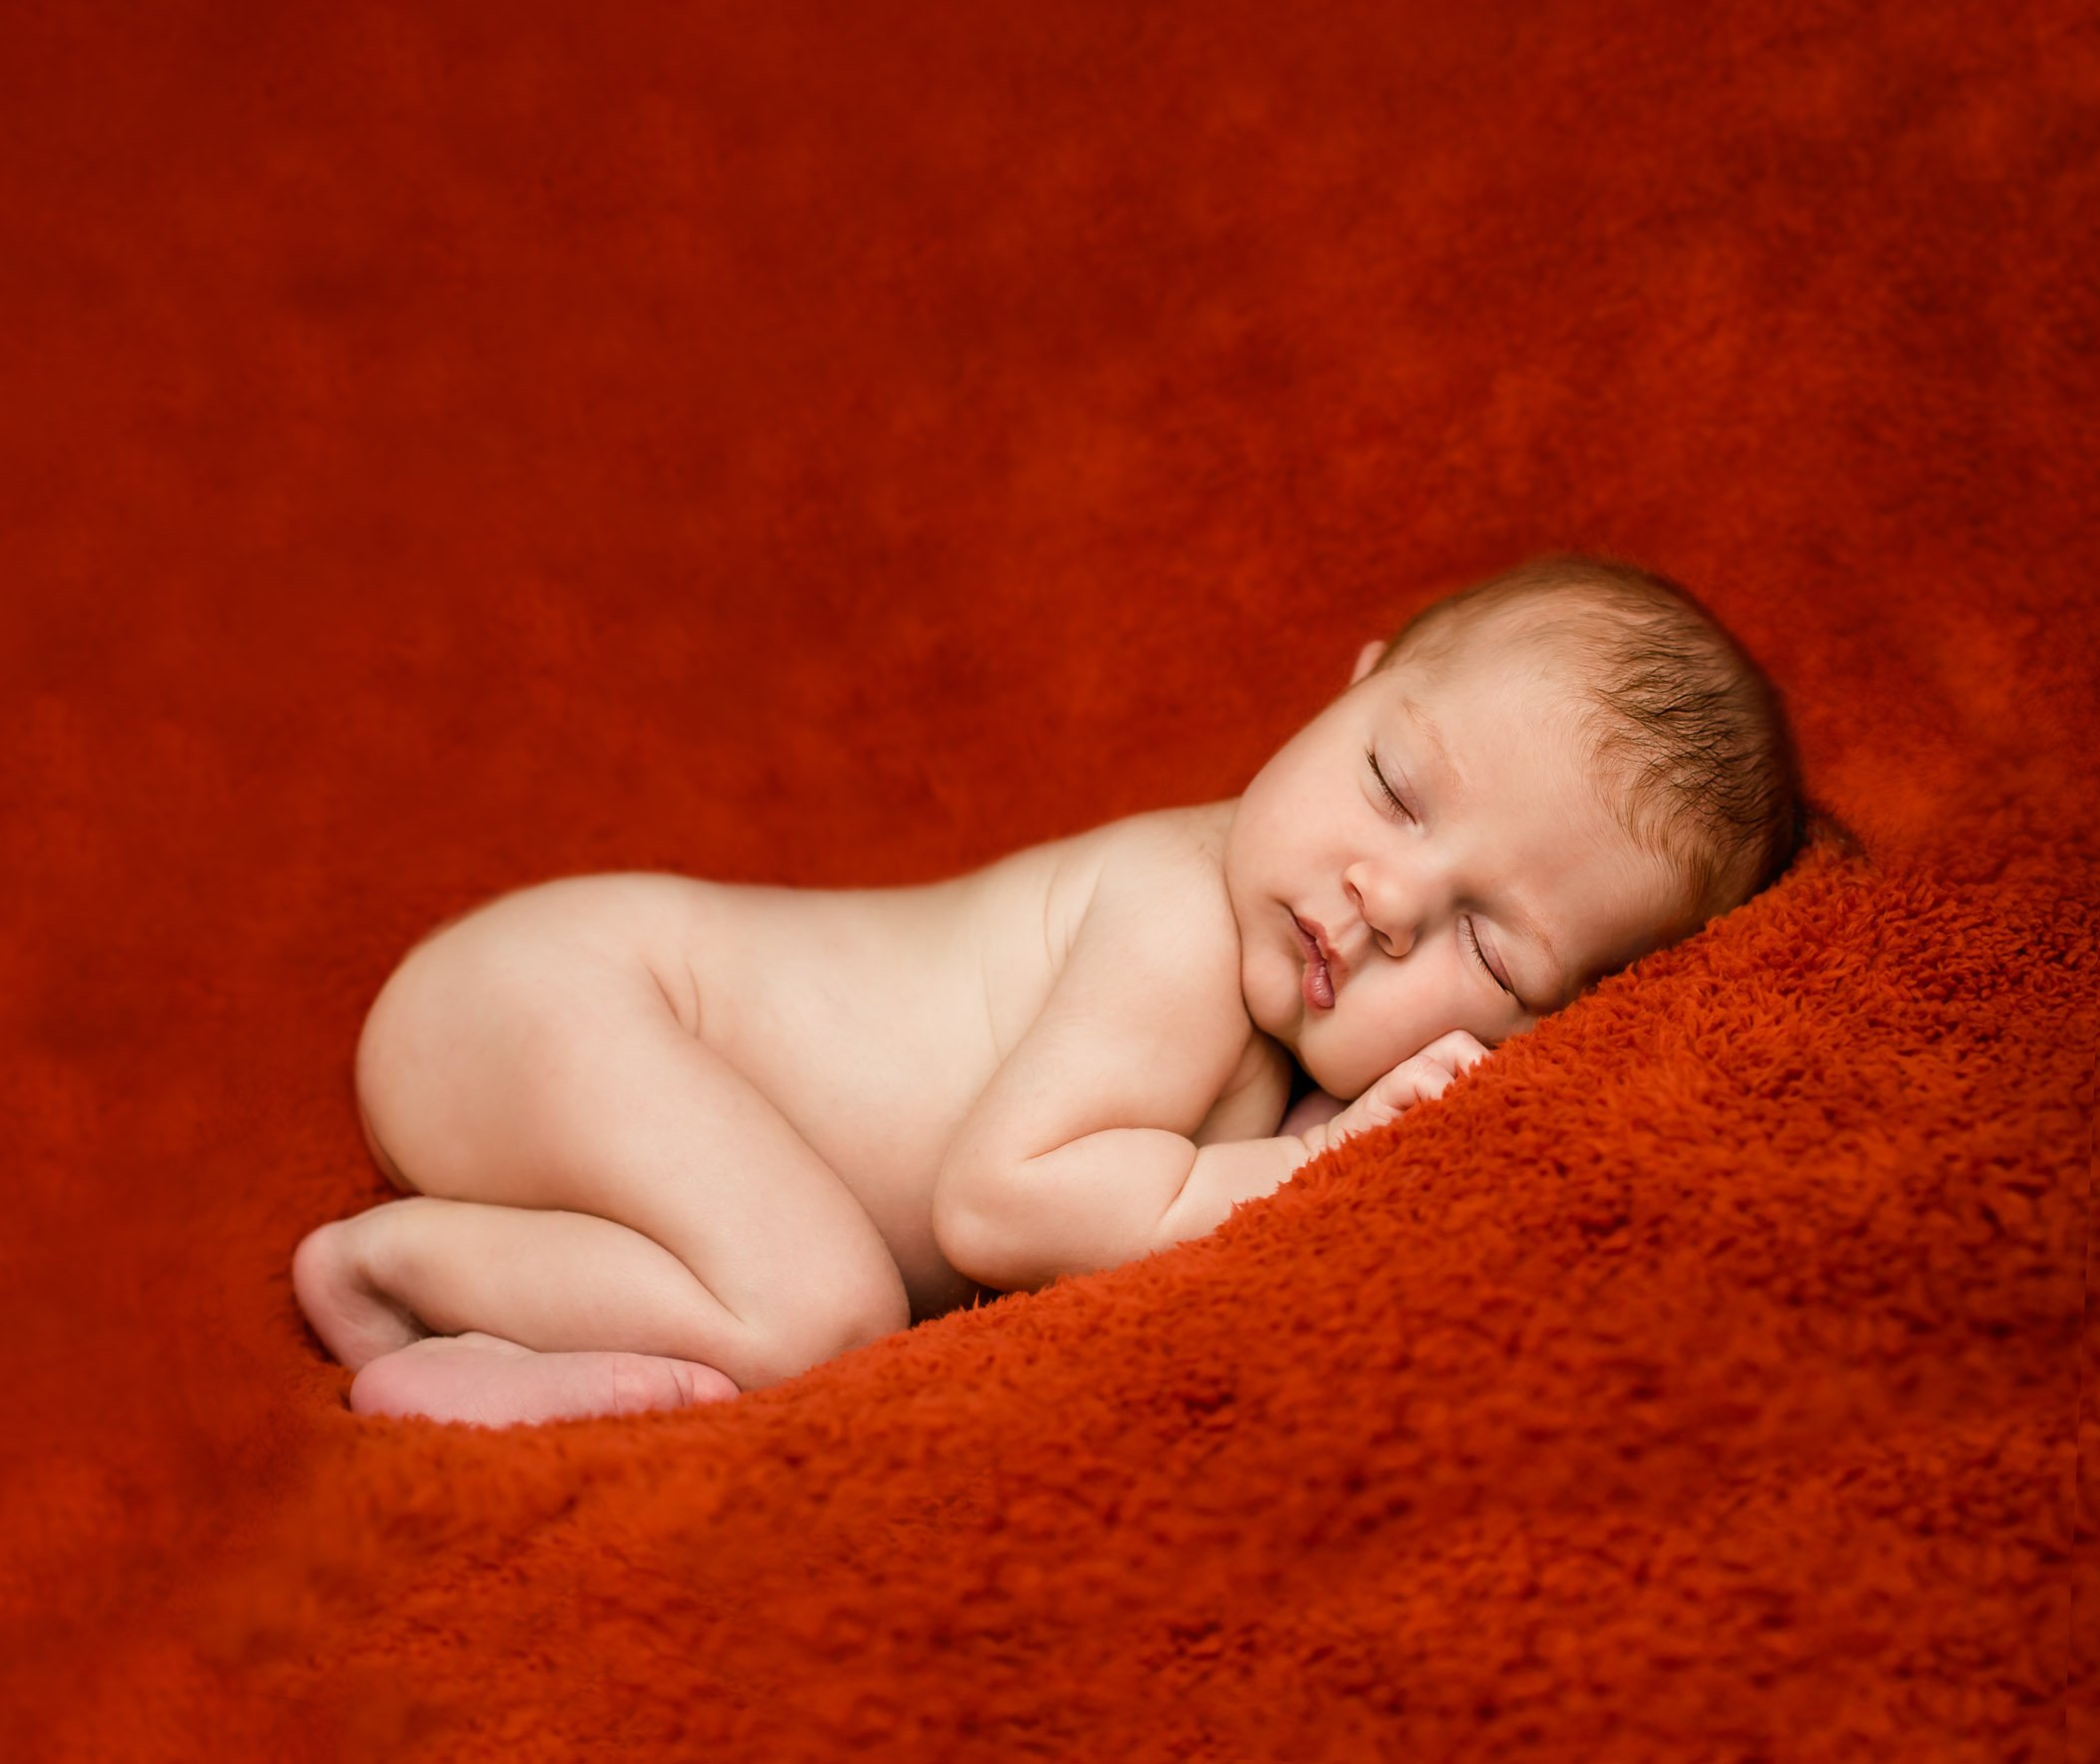 naked newborn baby sleeping on a rust colored blanket